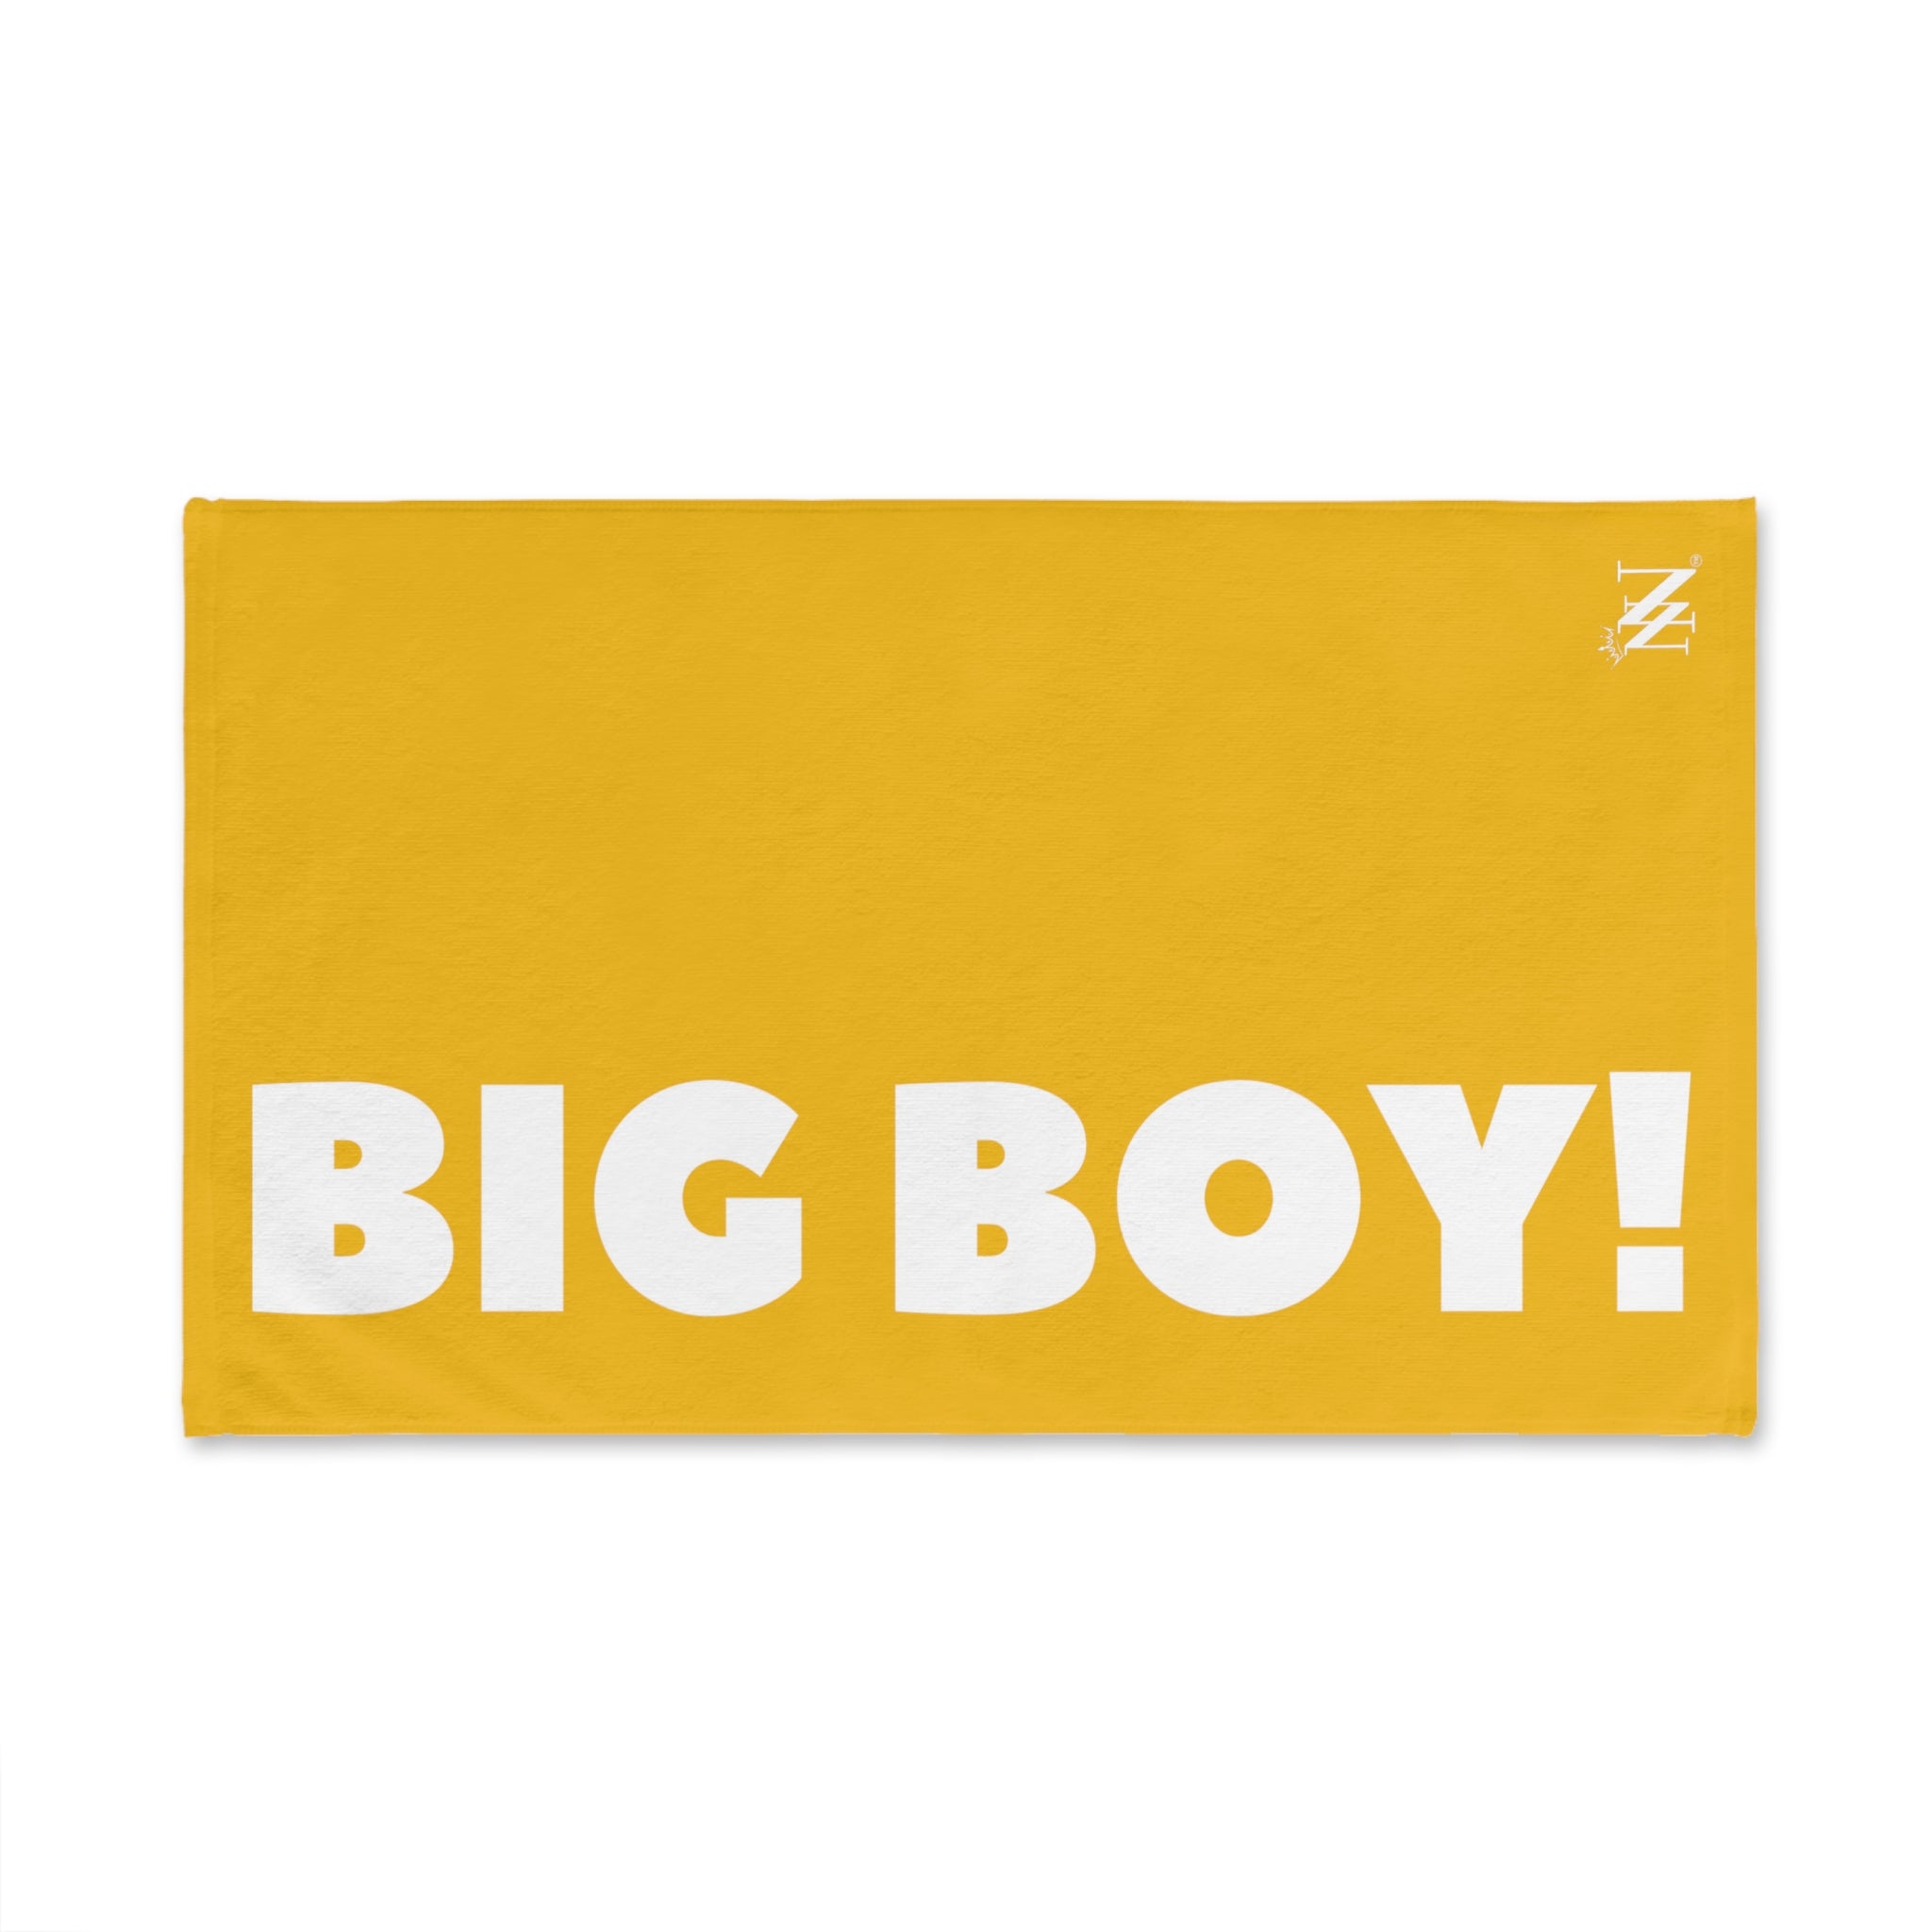 Big Boy Man |Gifts for Boyfriend, Funny Towel Romantic Gift for Wedding Couple Fiance First Year Anniversary Valentines, Party Gag Gifts, Joke Humor Cloth for Husband Men BF NECTAR NAPKINS